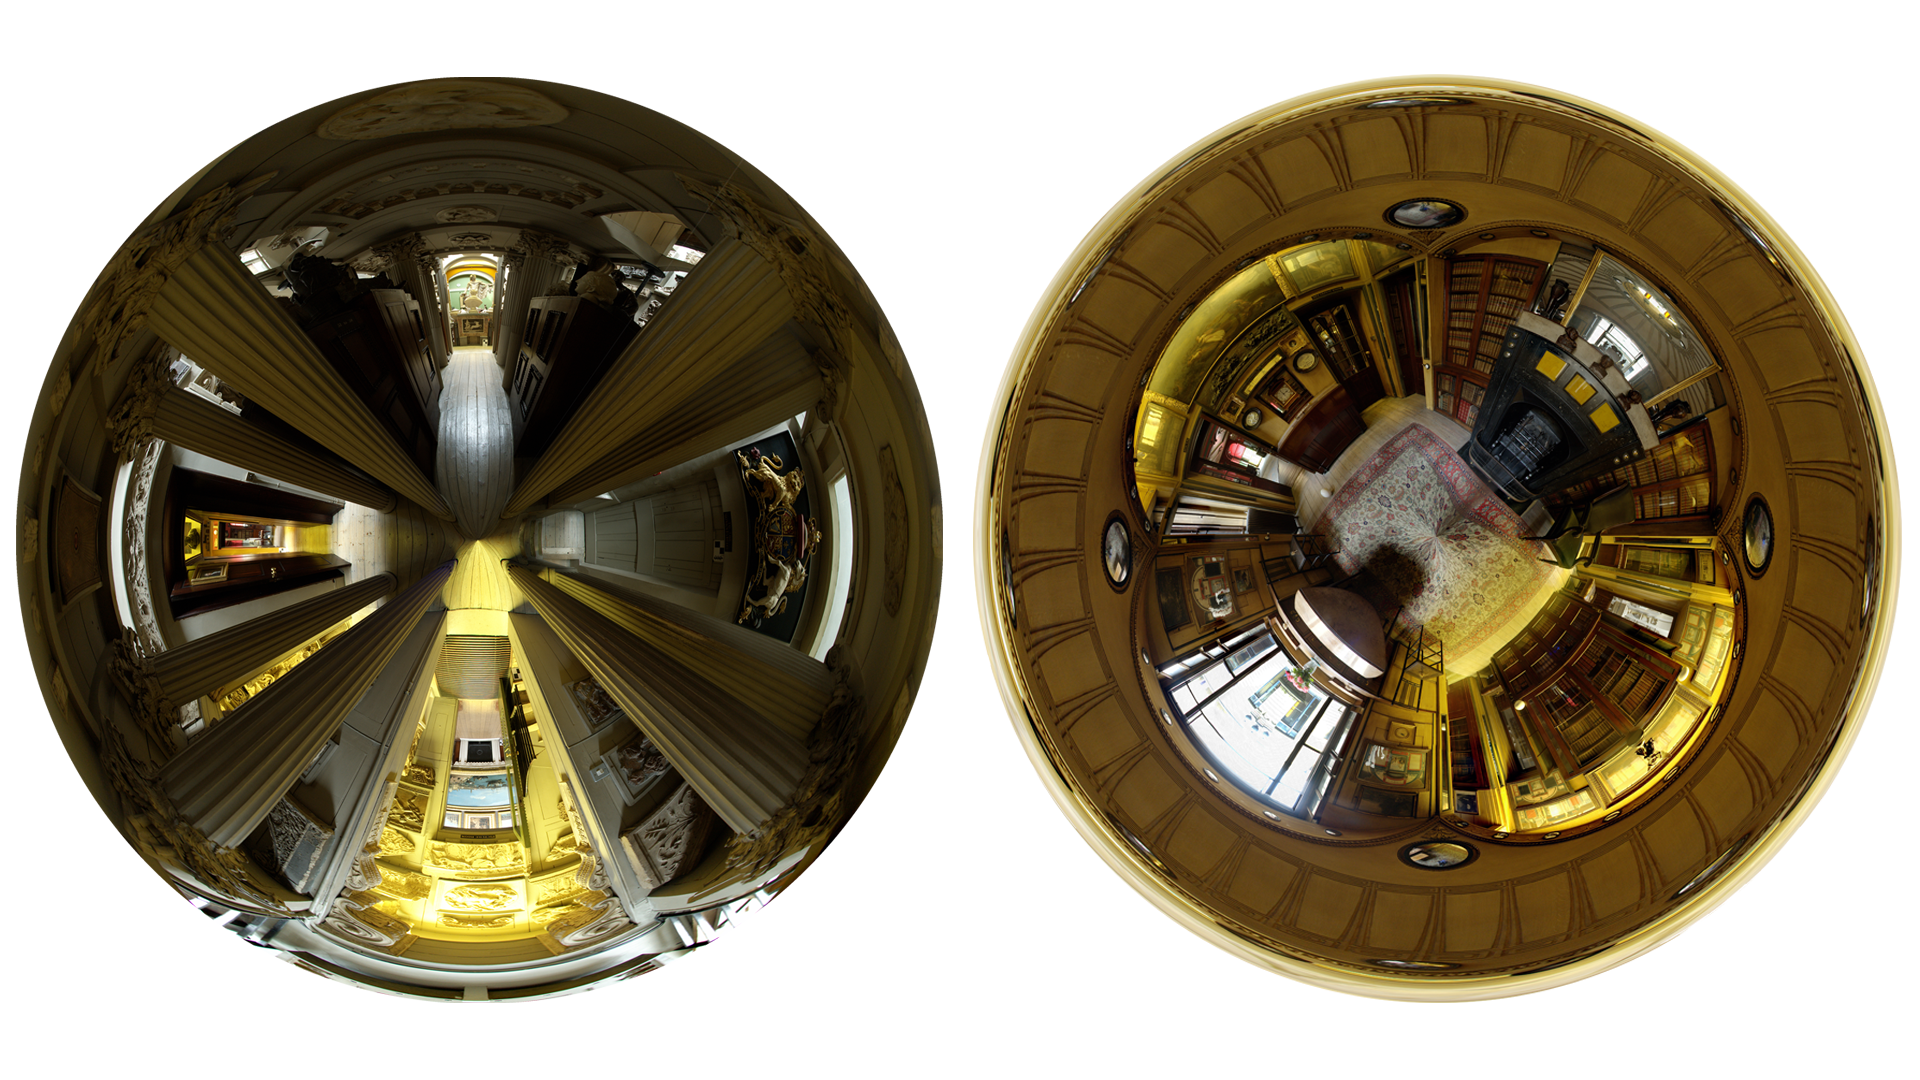 Stereographic projections of the Museum and Breakfast Room of Sir John Soane’s Museum, London through a fisheye lens